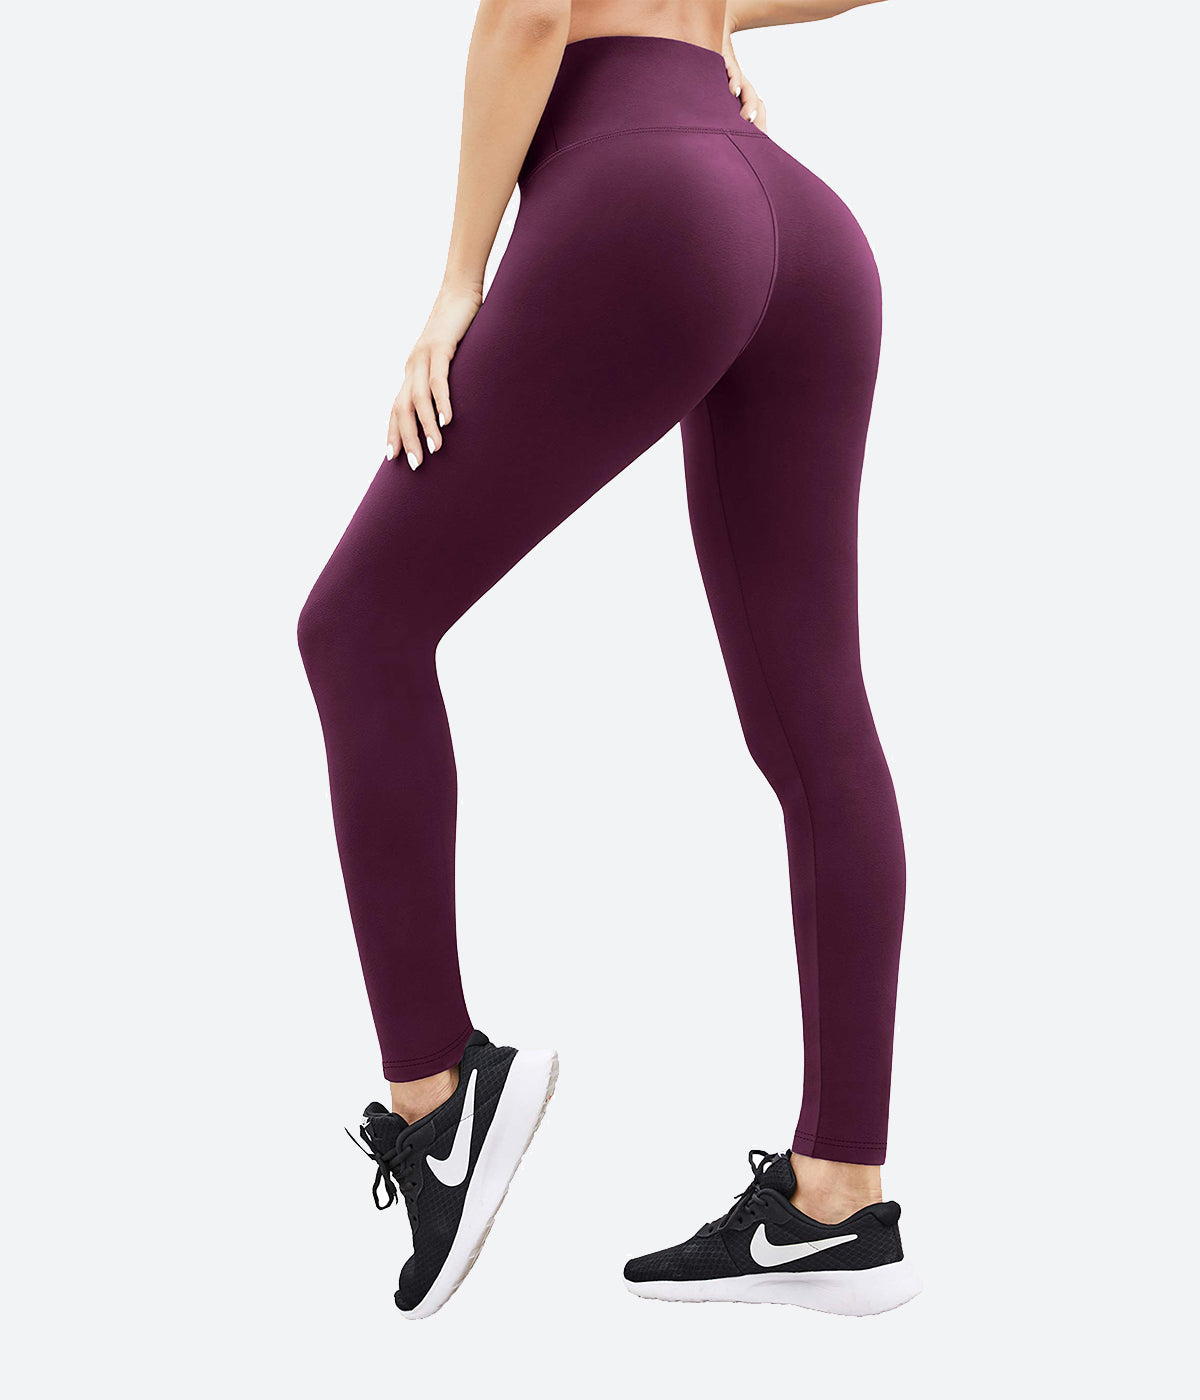 Super Stretchy Workout Yoga Pants with Pockets - HY60 – Heathyoga